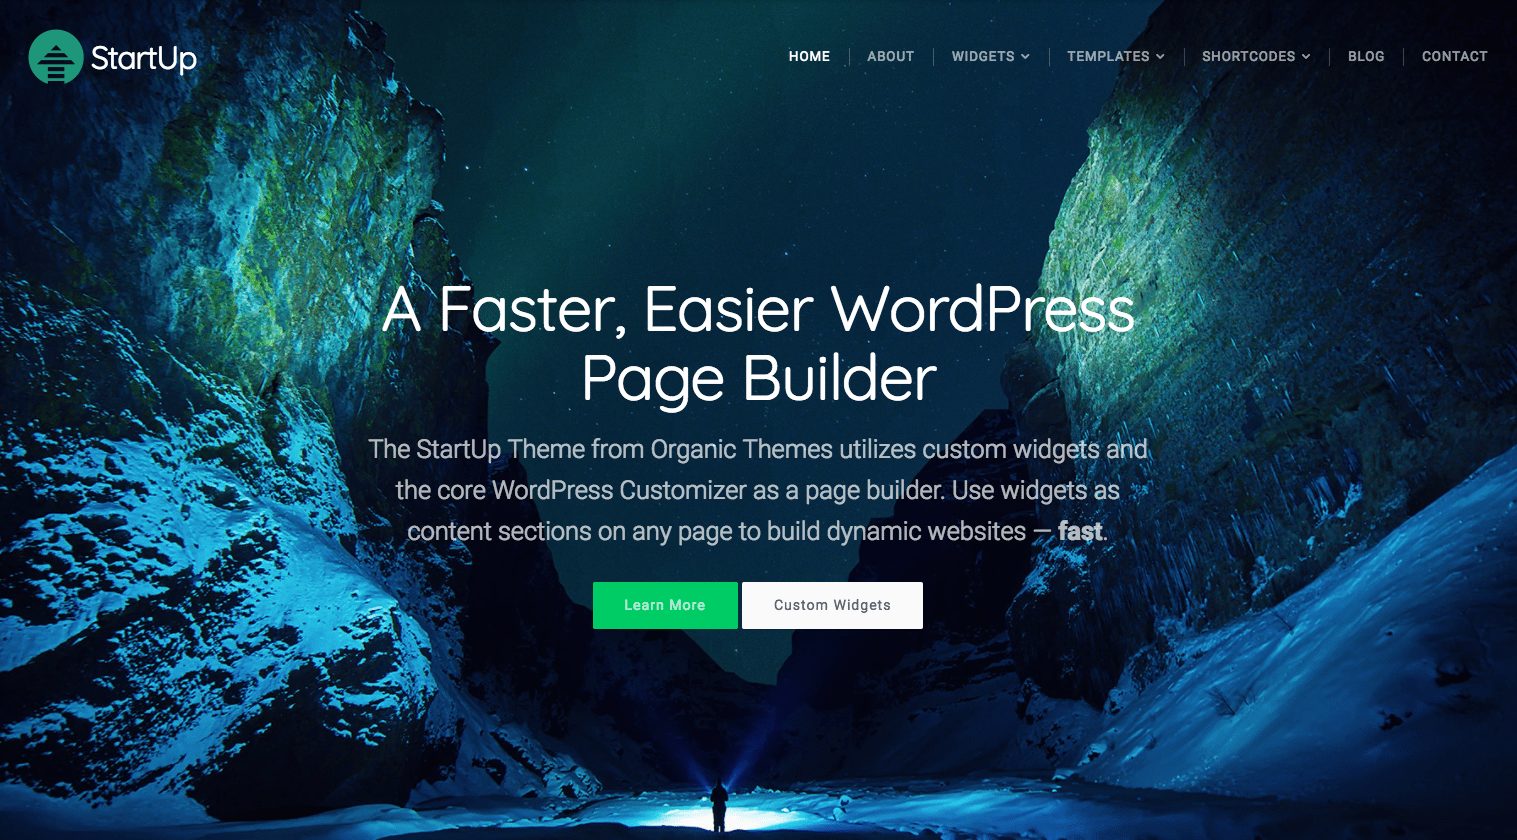 The StartUp WordPress theme allows you to build amazing, responsive pages using just the basic WordPress customizer panel